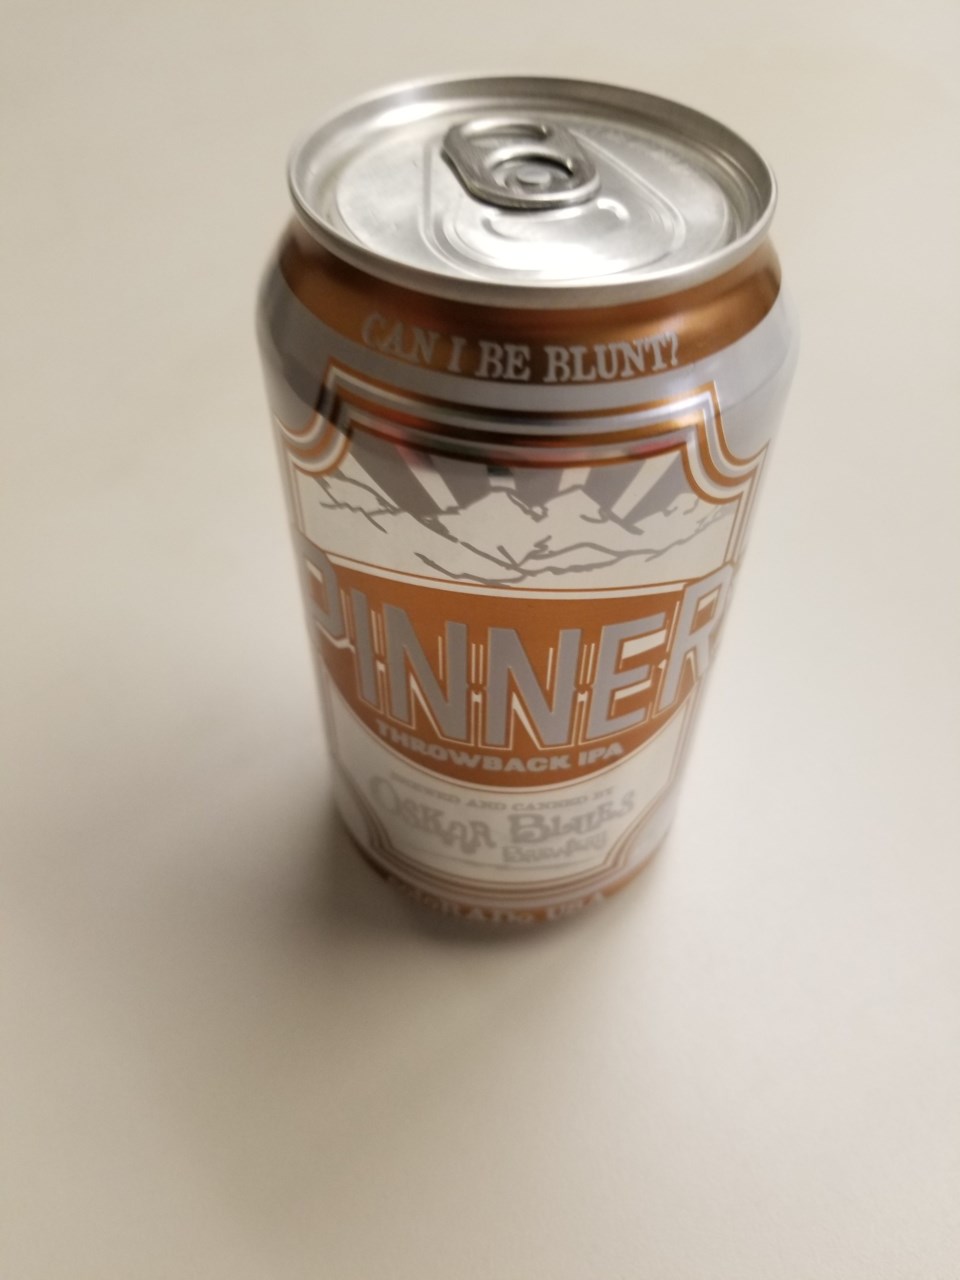 Pinner Throwback IPA in a can By Oskar Blues